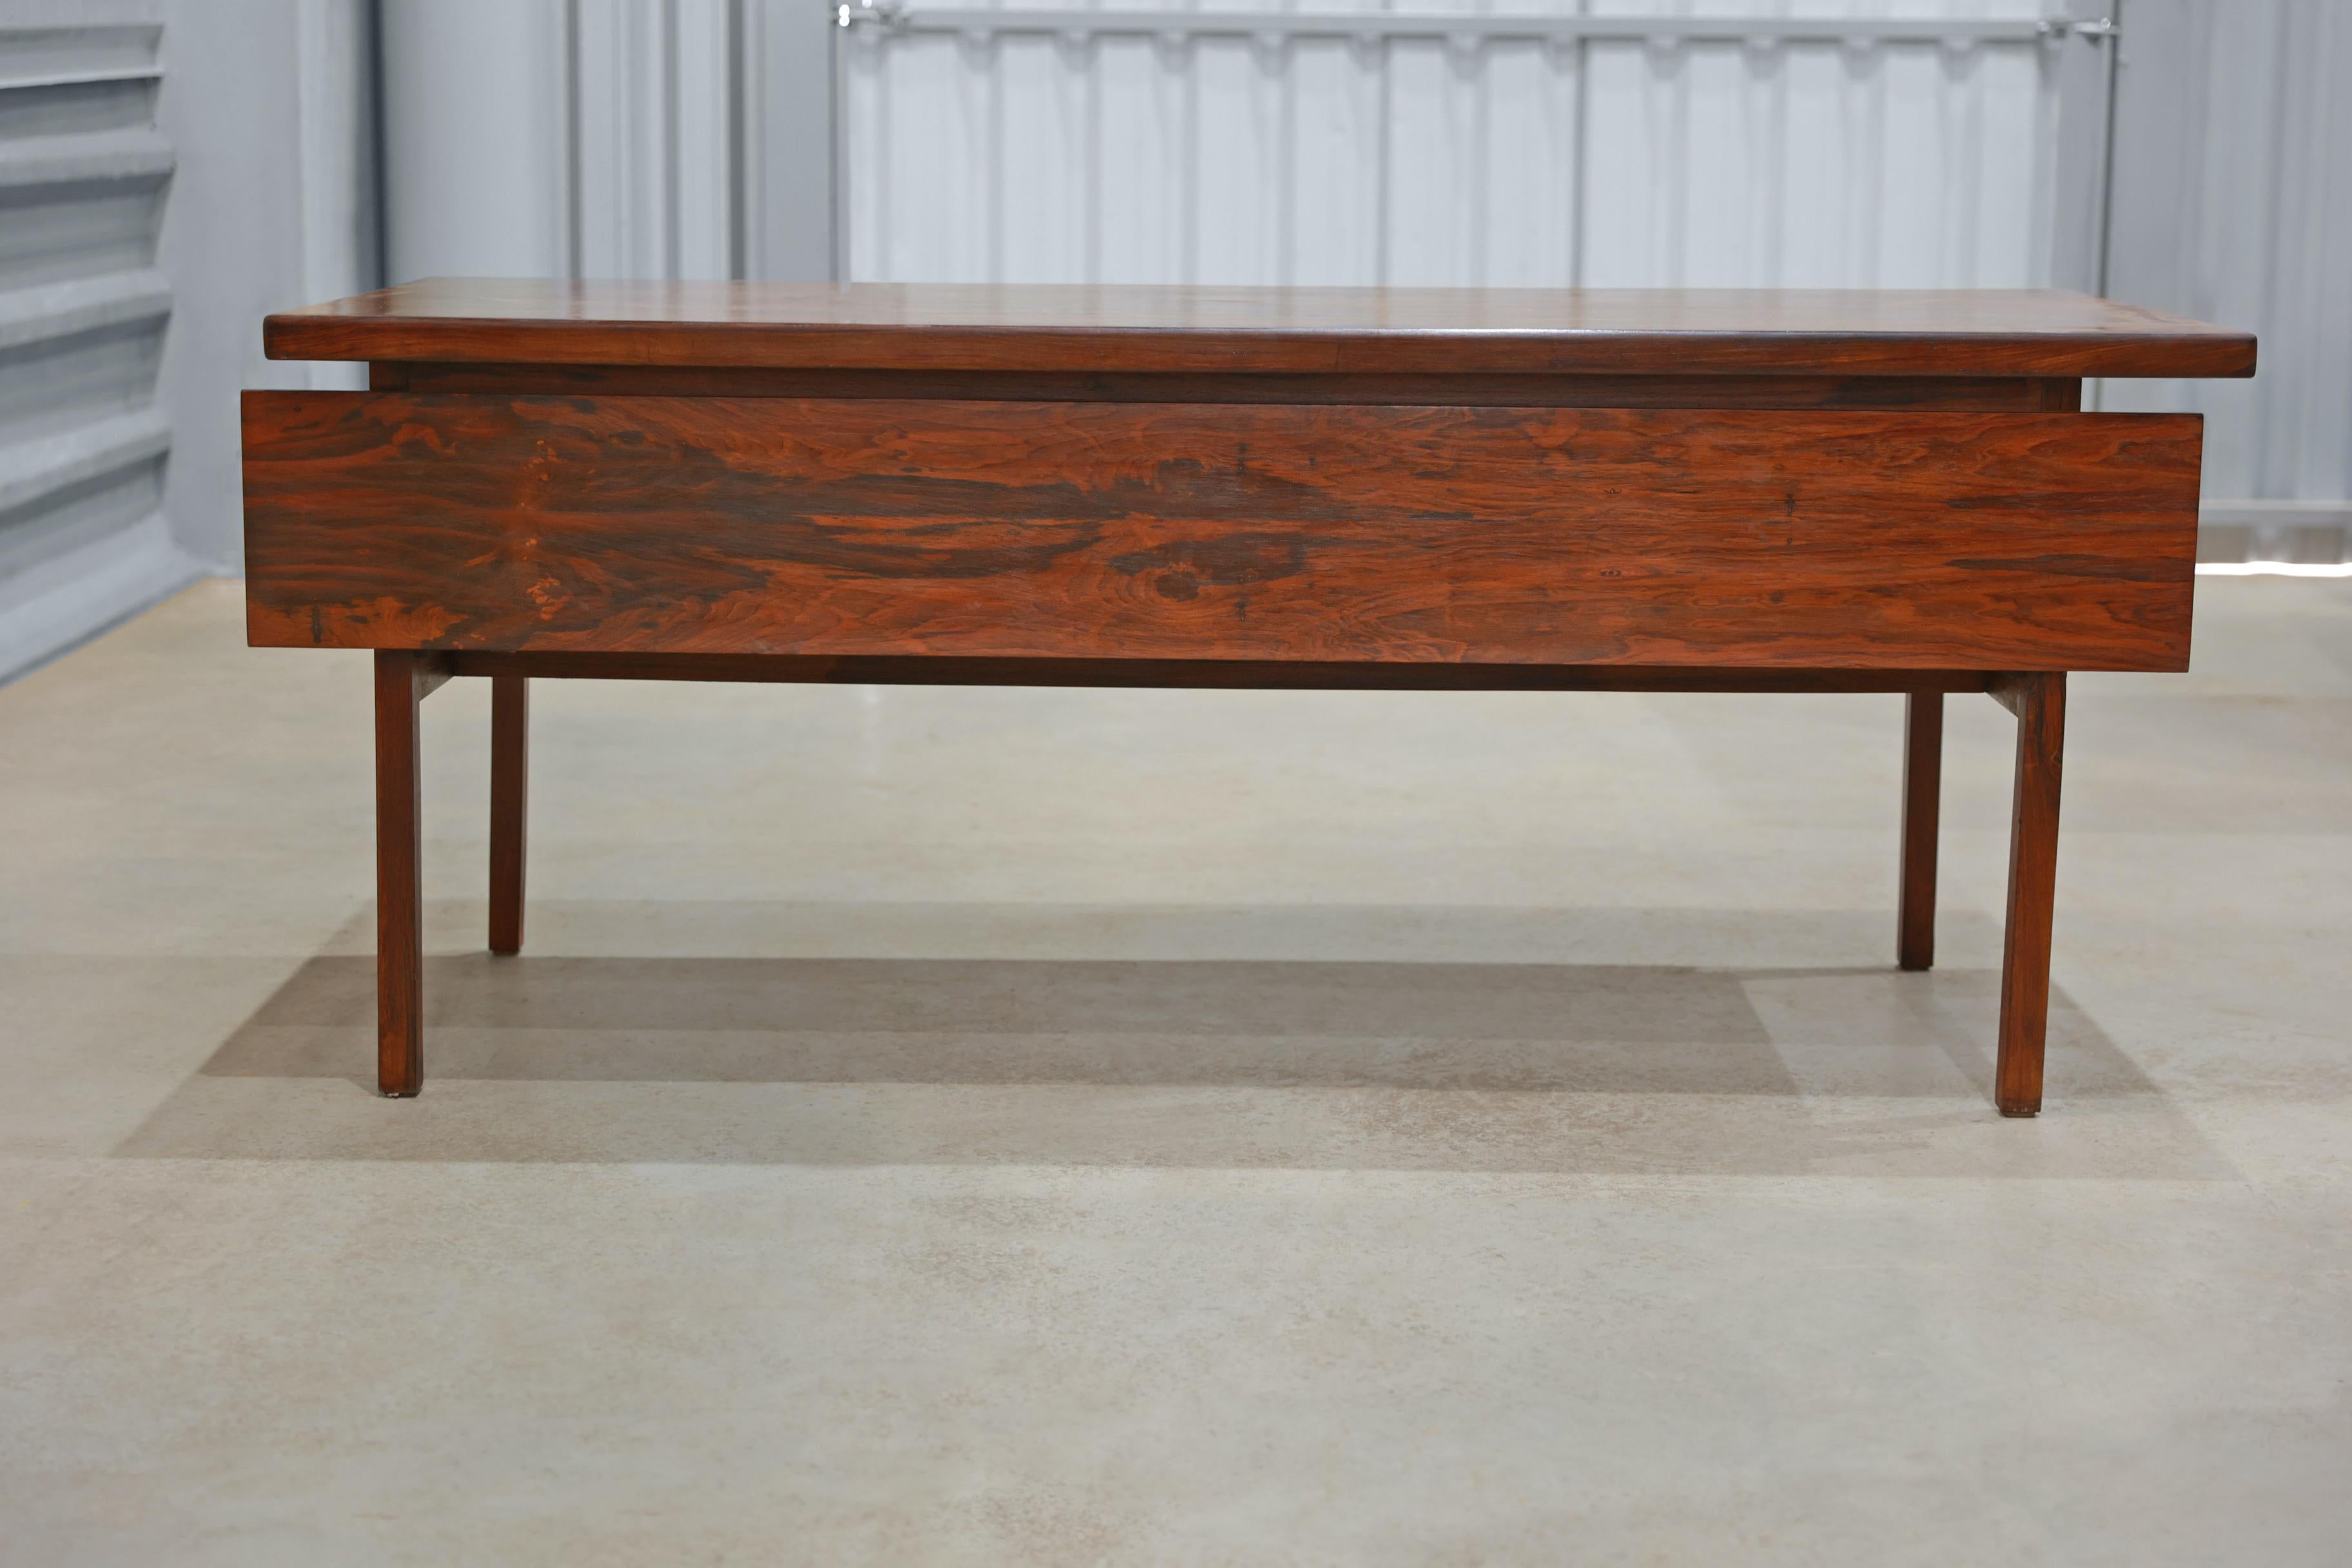 Hardwood Mid-Century Modern Desk by Sergio Rodrigues, Brazil, 1960s For Sale